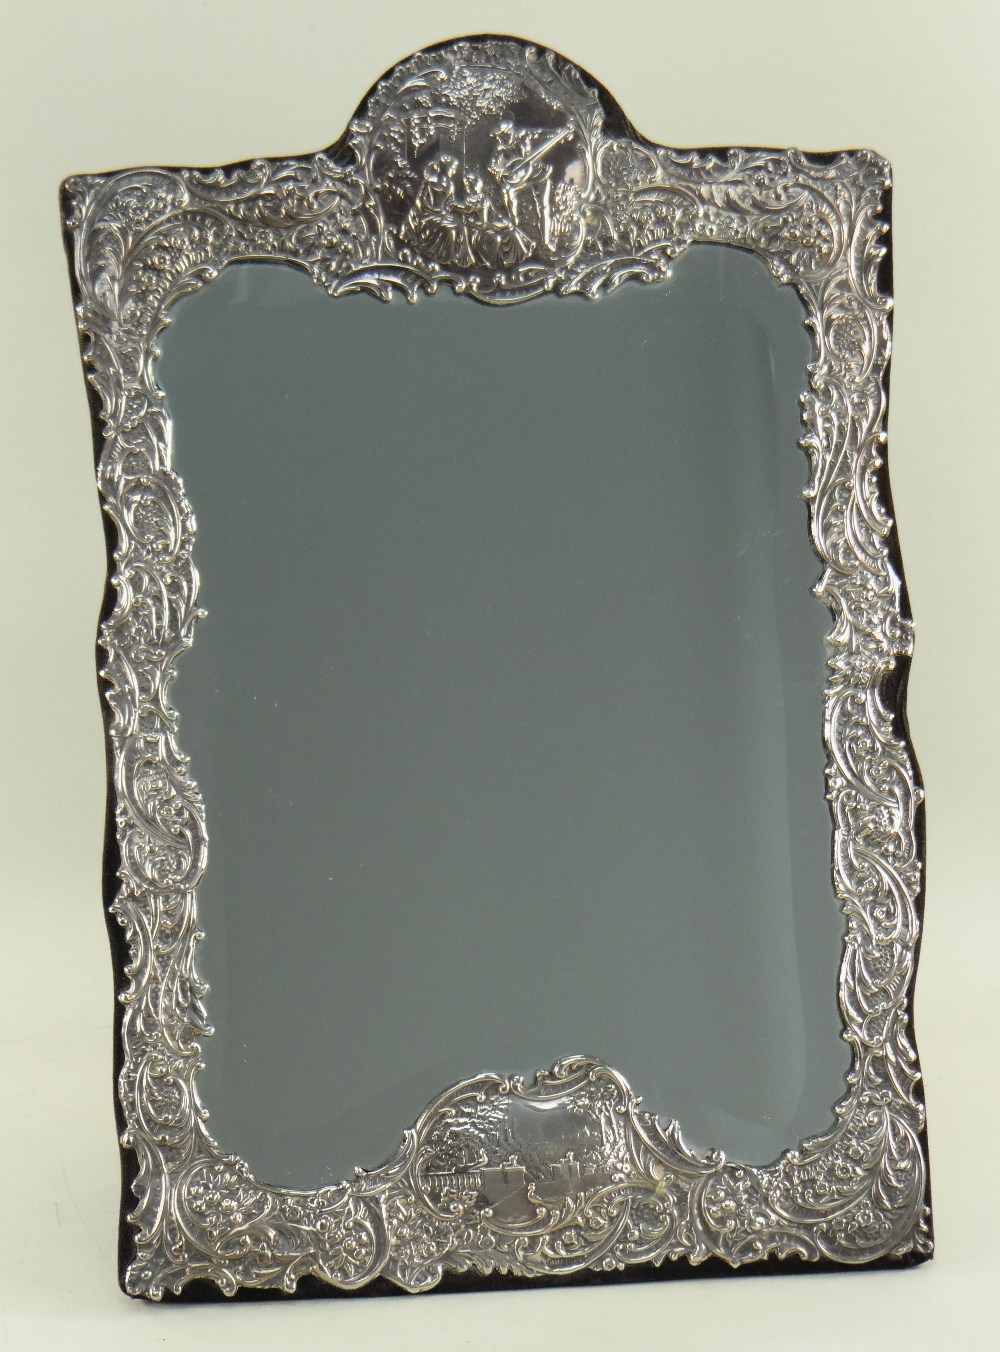 VICTORIAN-STYLE EMBOSSED SILVER EASEL-BACK MIRROR, London 1990 by M&LS, decorated with